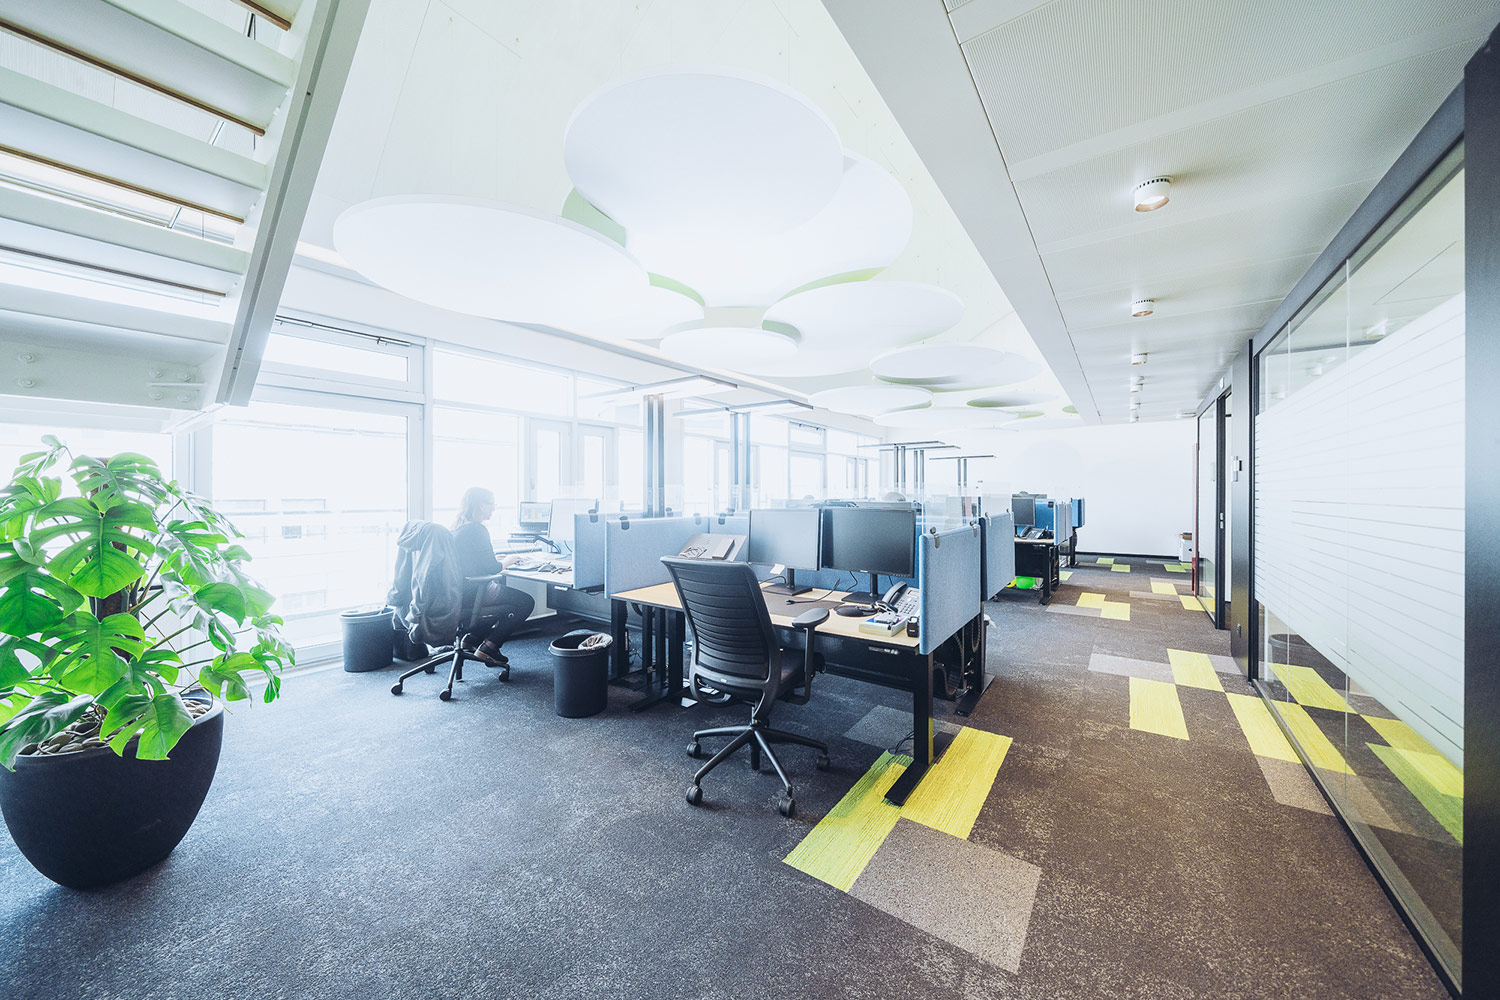 SWICA, one of Switzerland’s leading healthcare and insurance organizations, retained WSDG to create an efficient and acoustically pleasant open space environment. Open office.